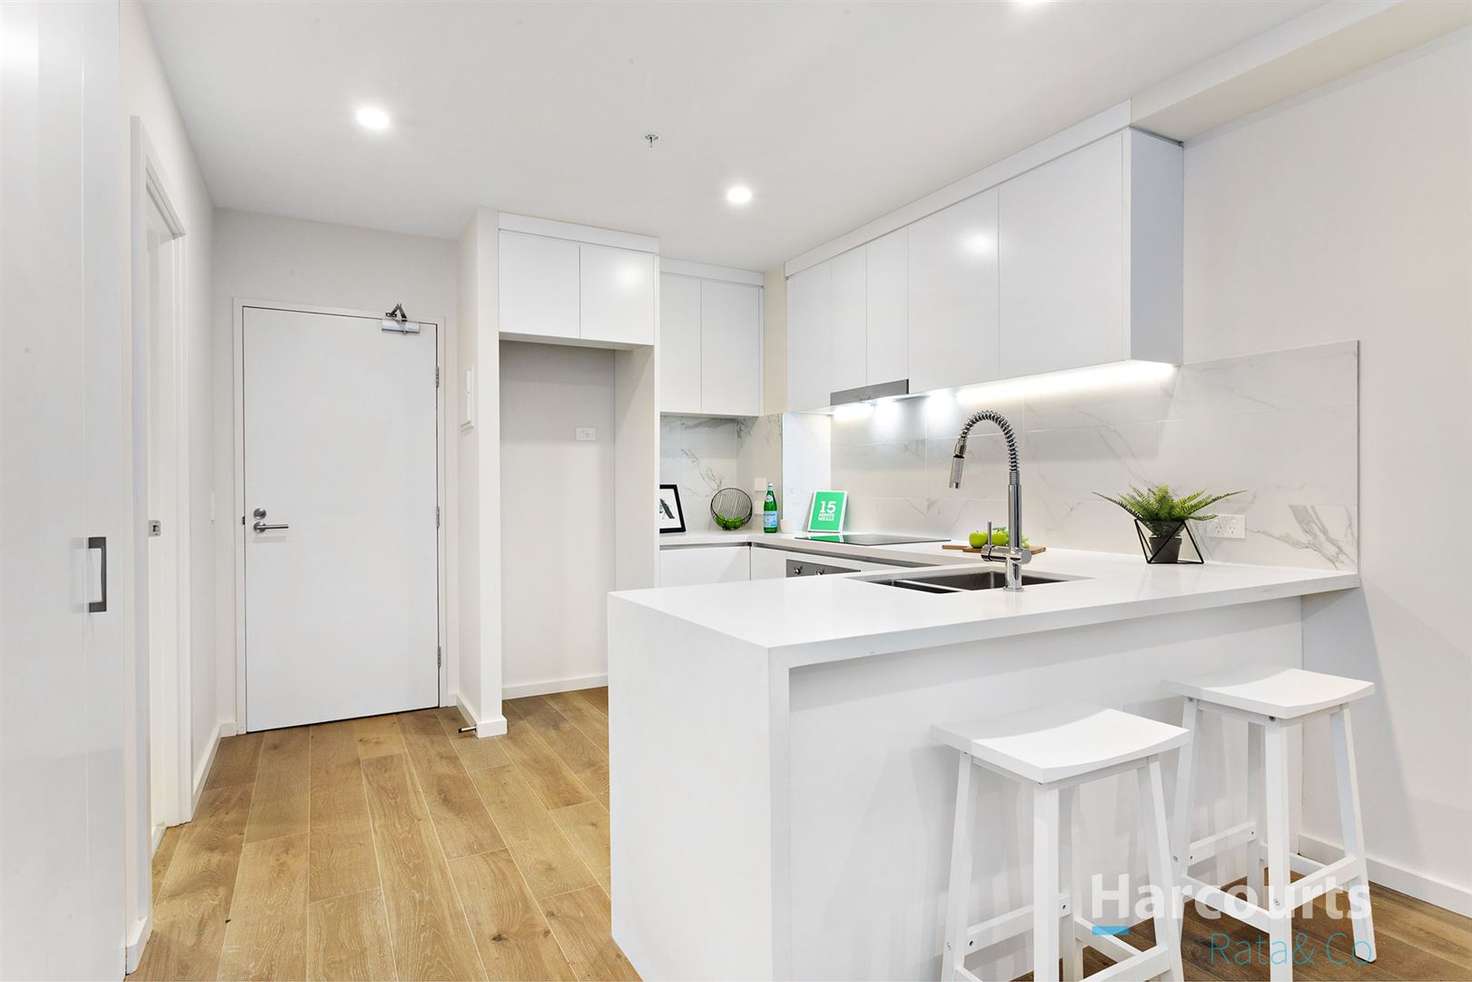 Main view of Homely apartment listing, 107/611-621 Sydney Road, Brunswick VIC 3056